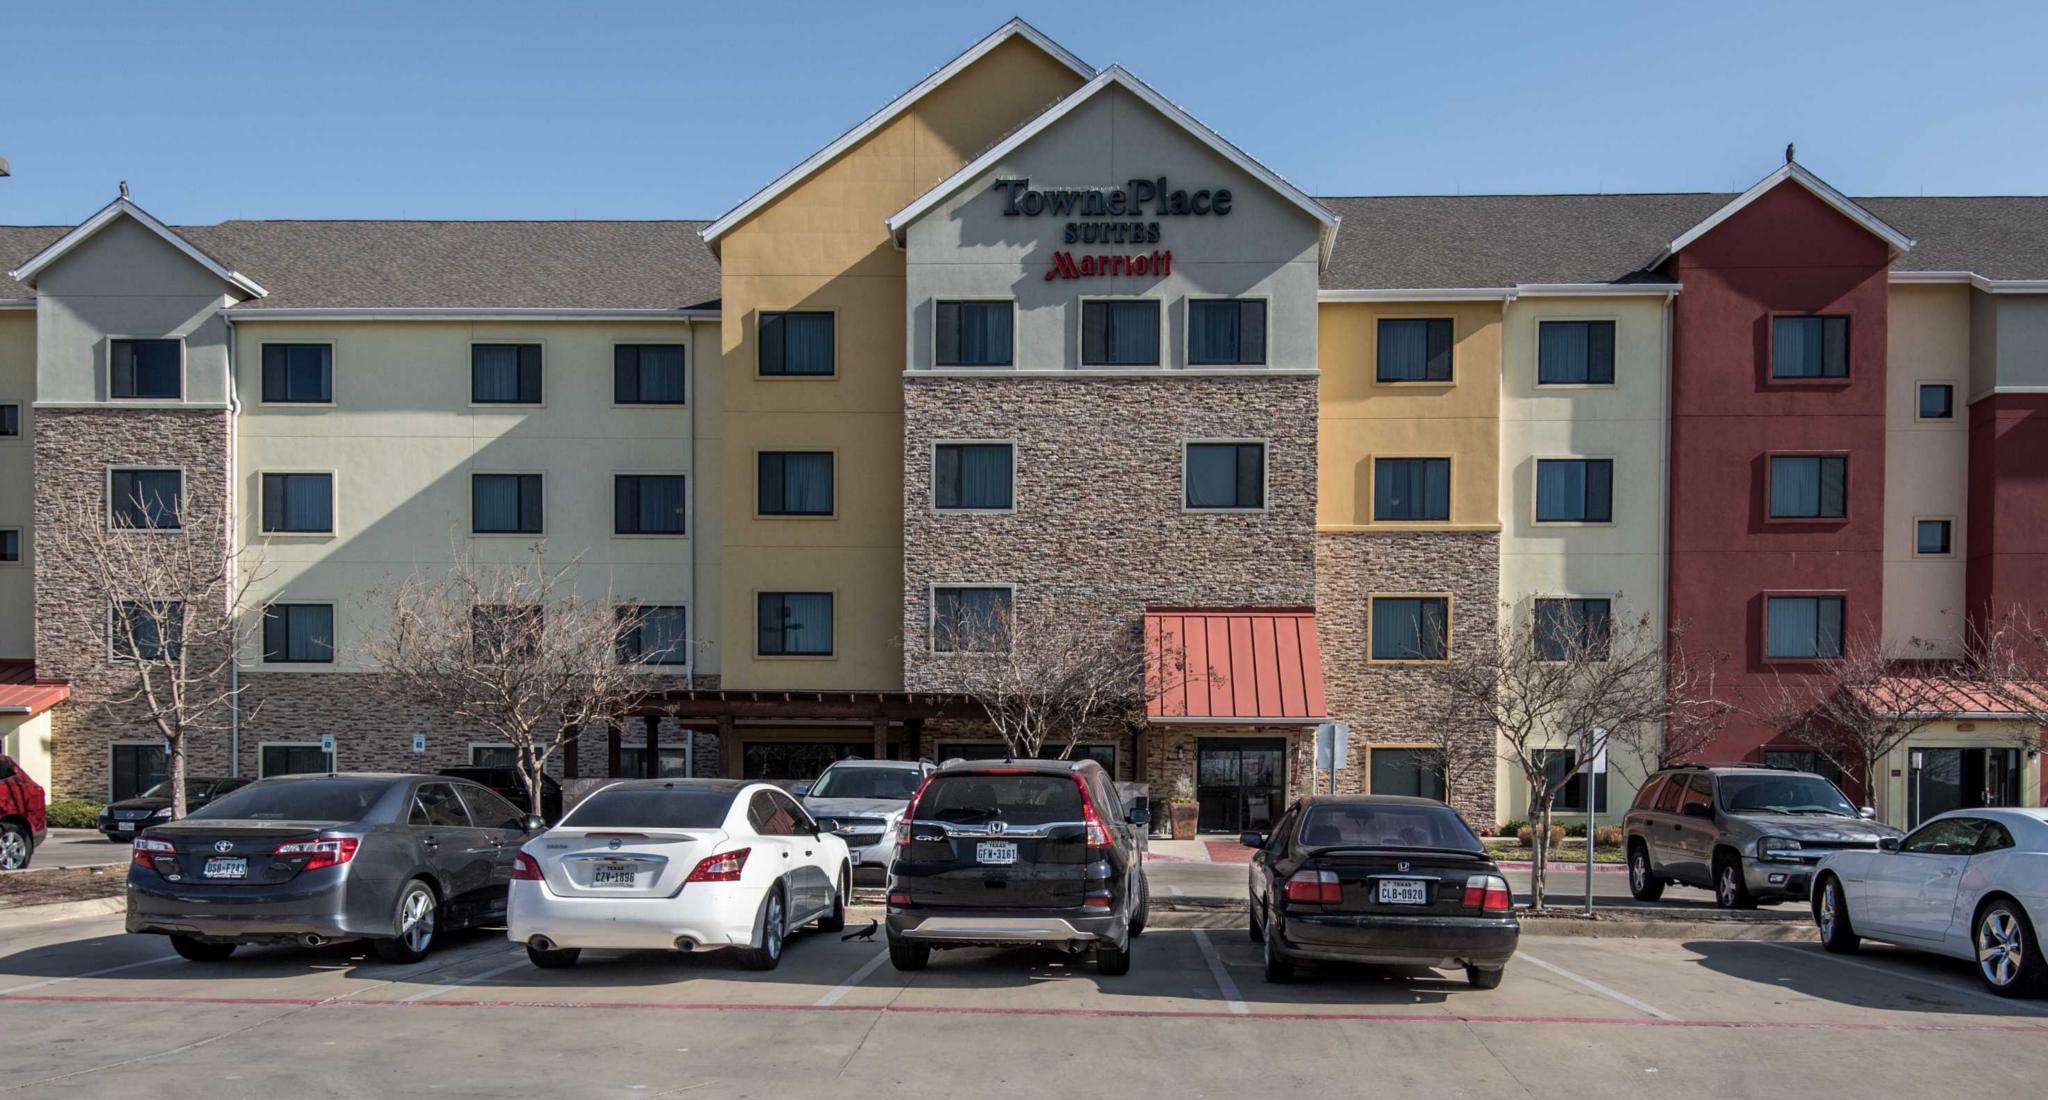  MyTravelution | TownePlace Suites by Marriott Dallas DeSoto Main